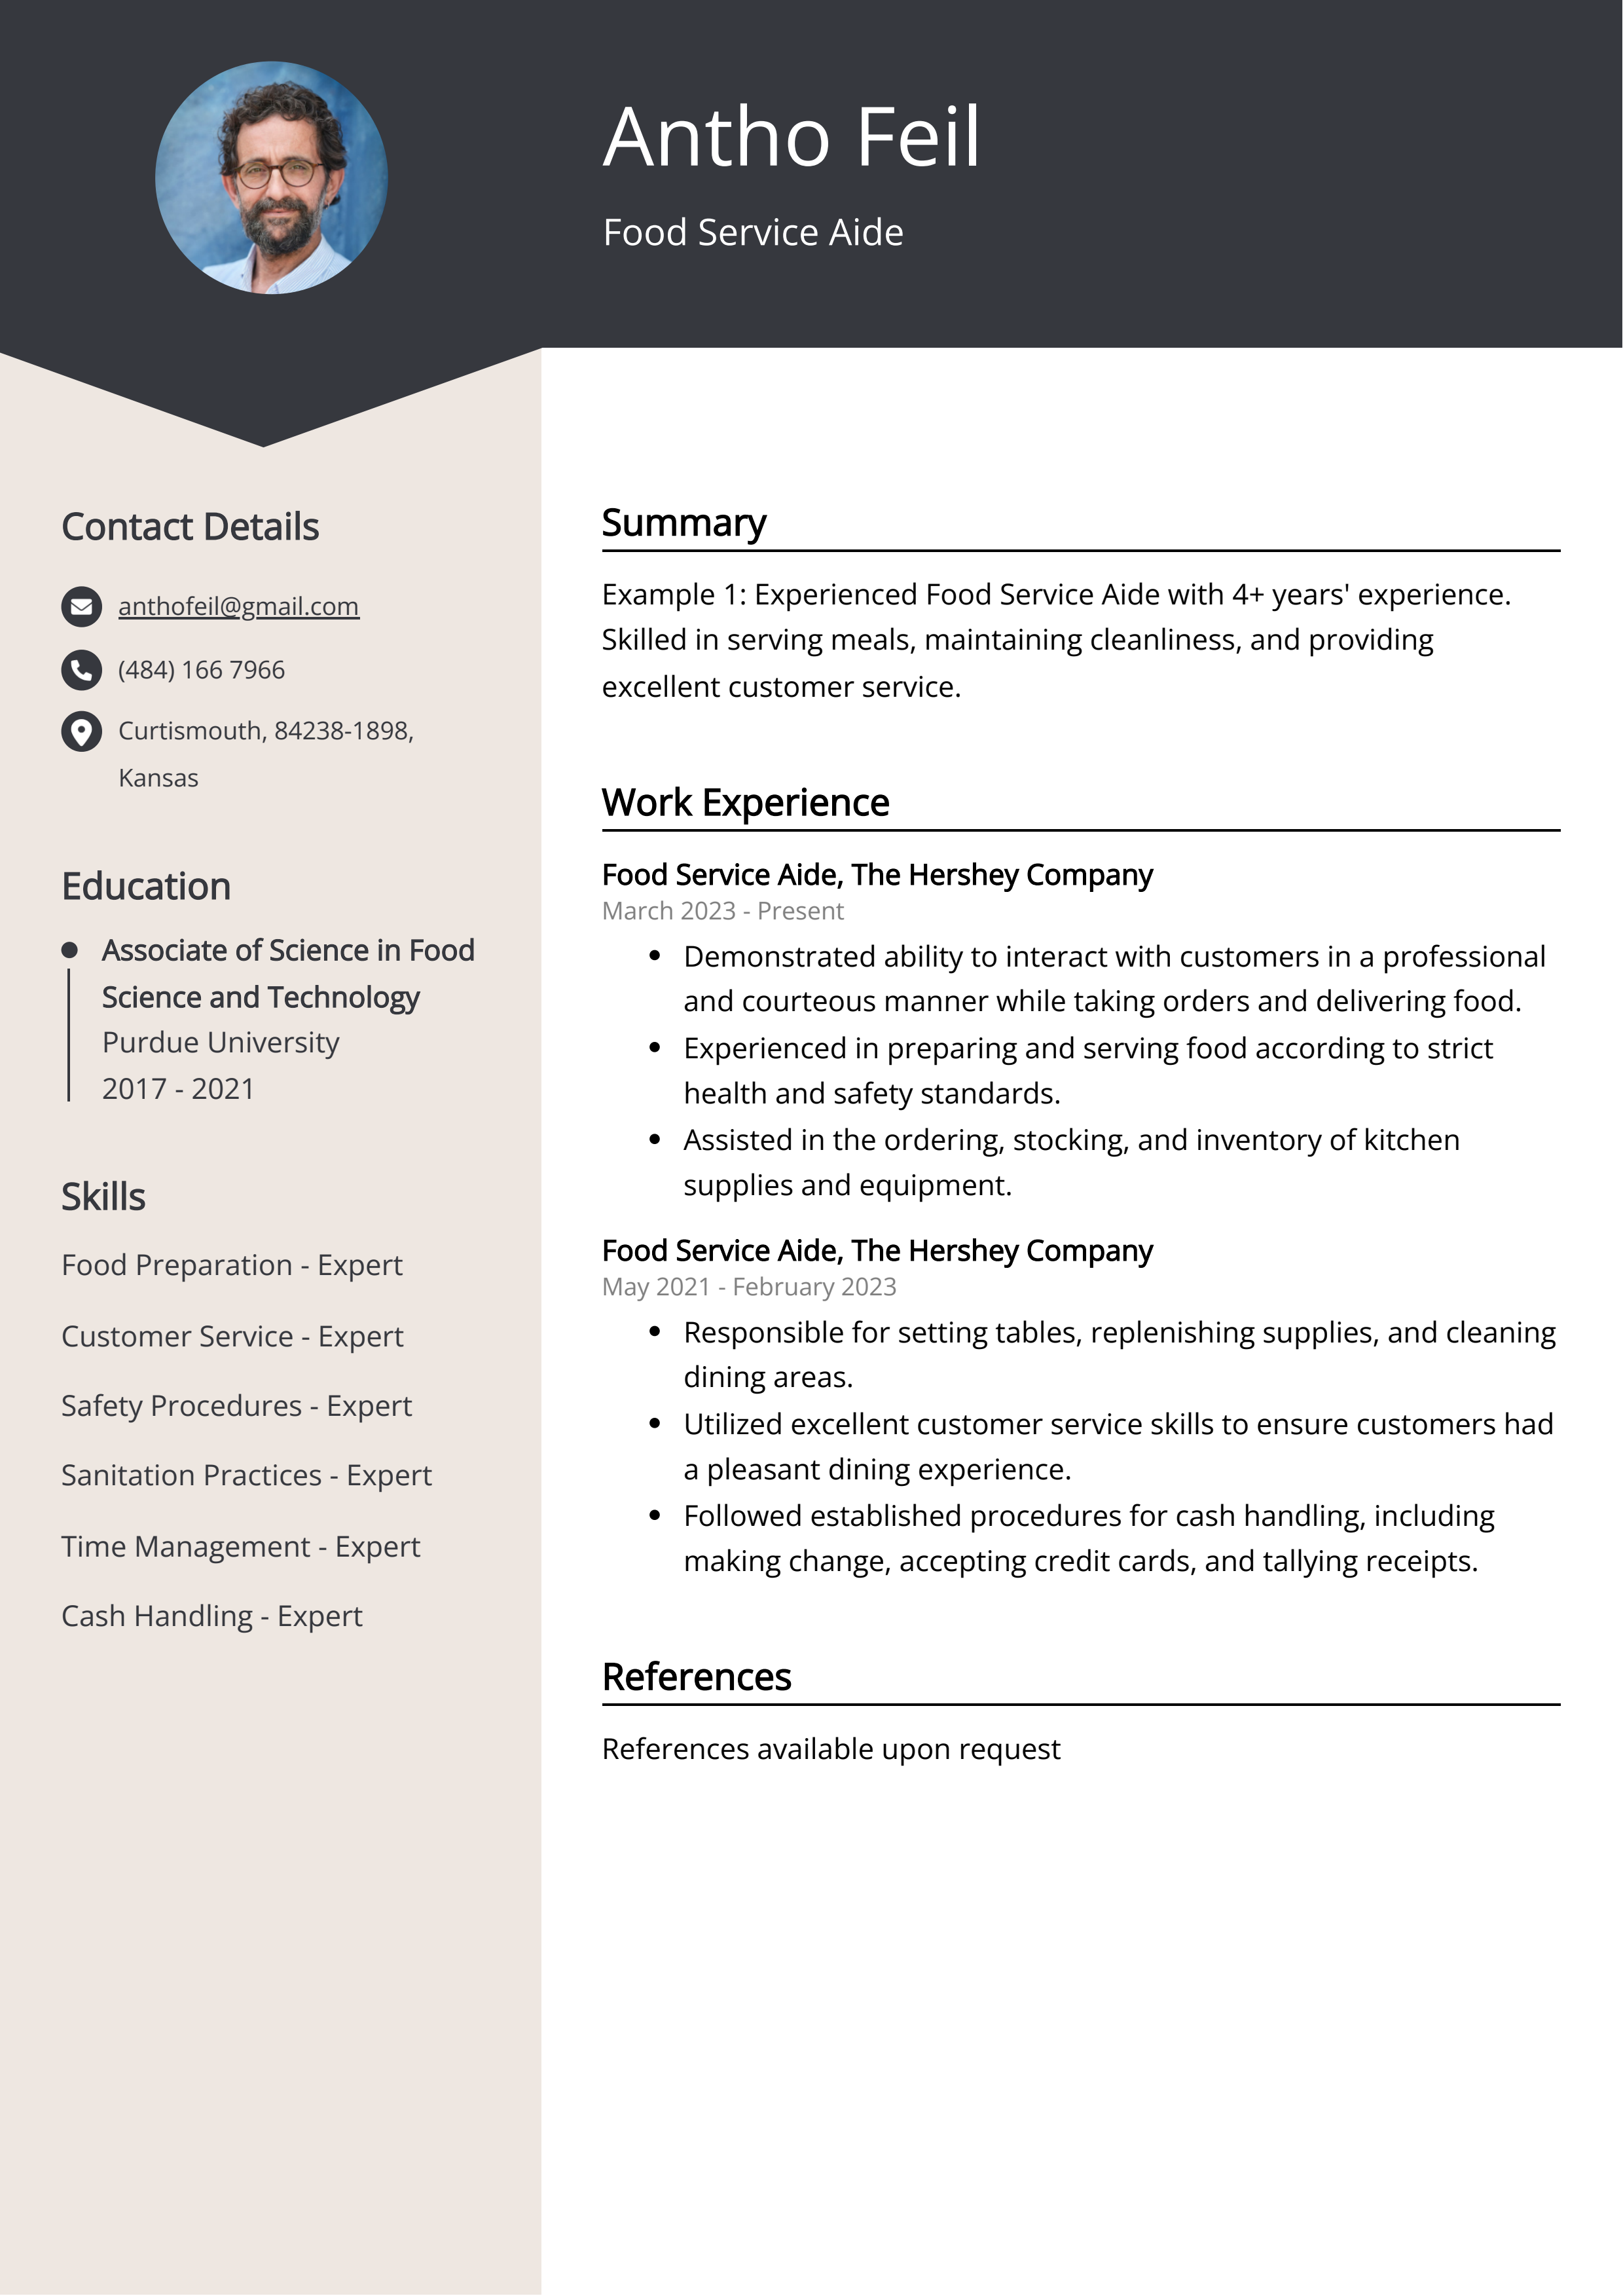 Food Service Aide Resume Example